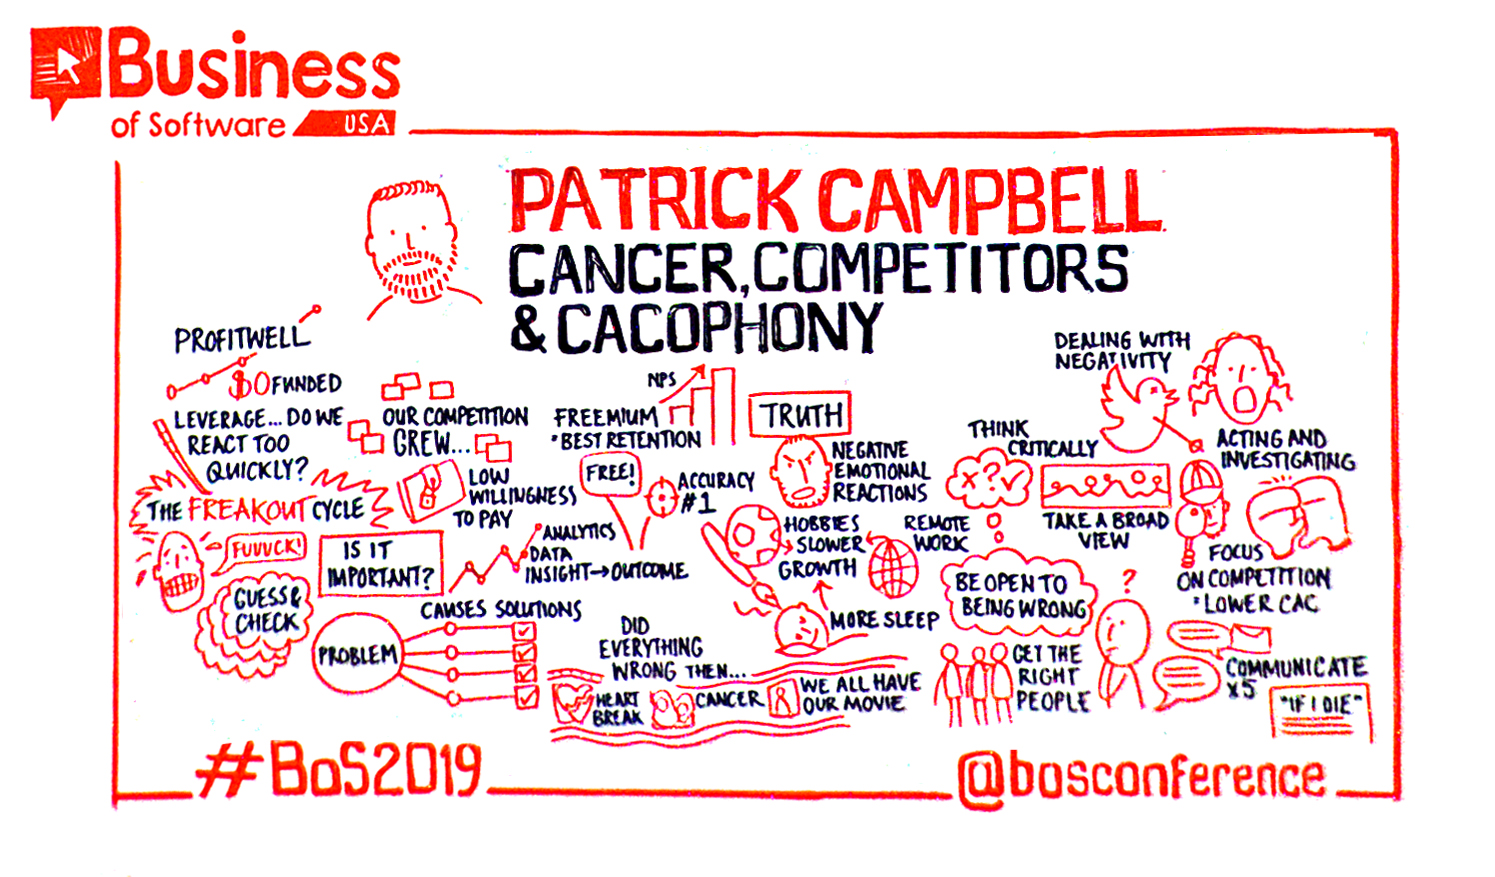 Patrick Campbell cancer competitors ceo sketchnote